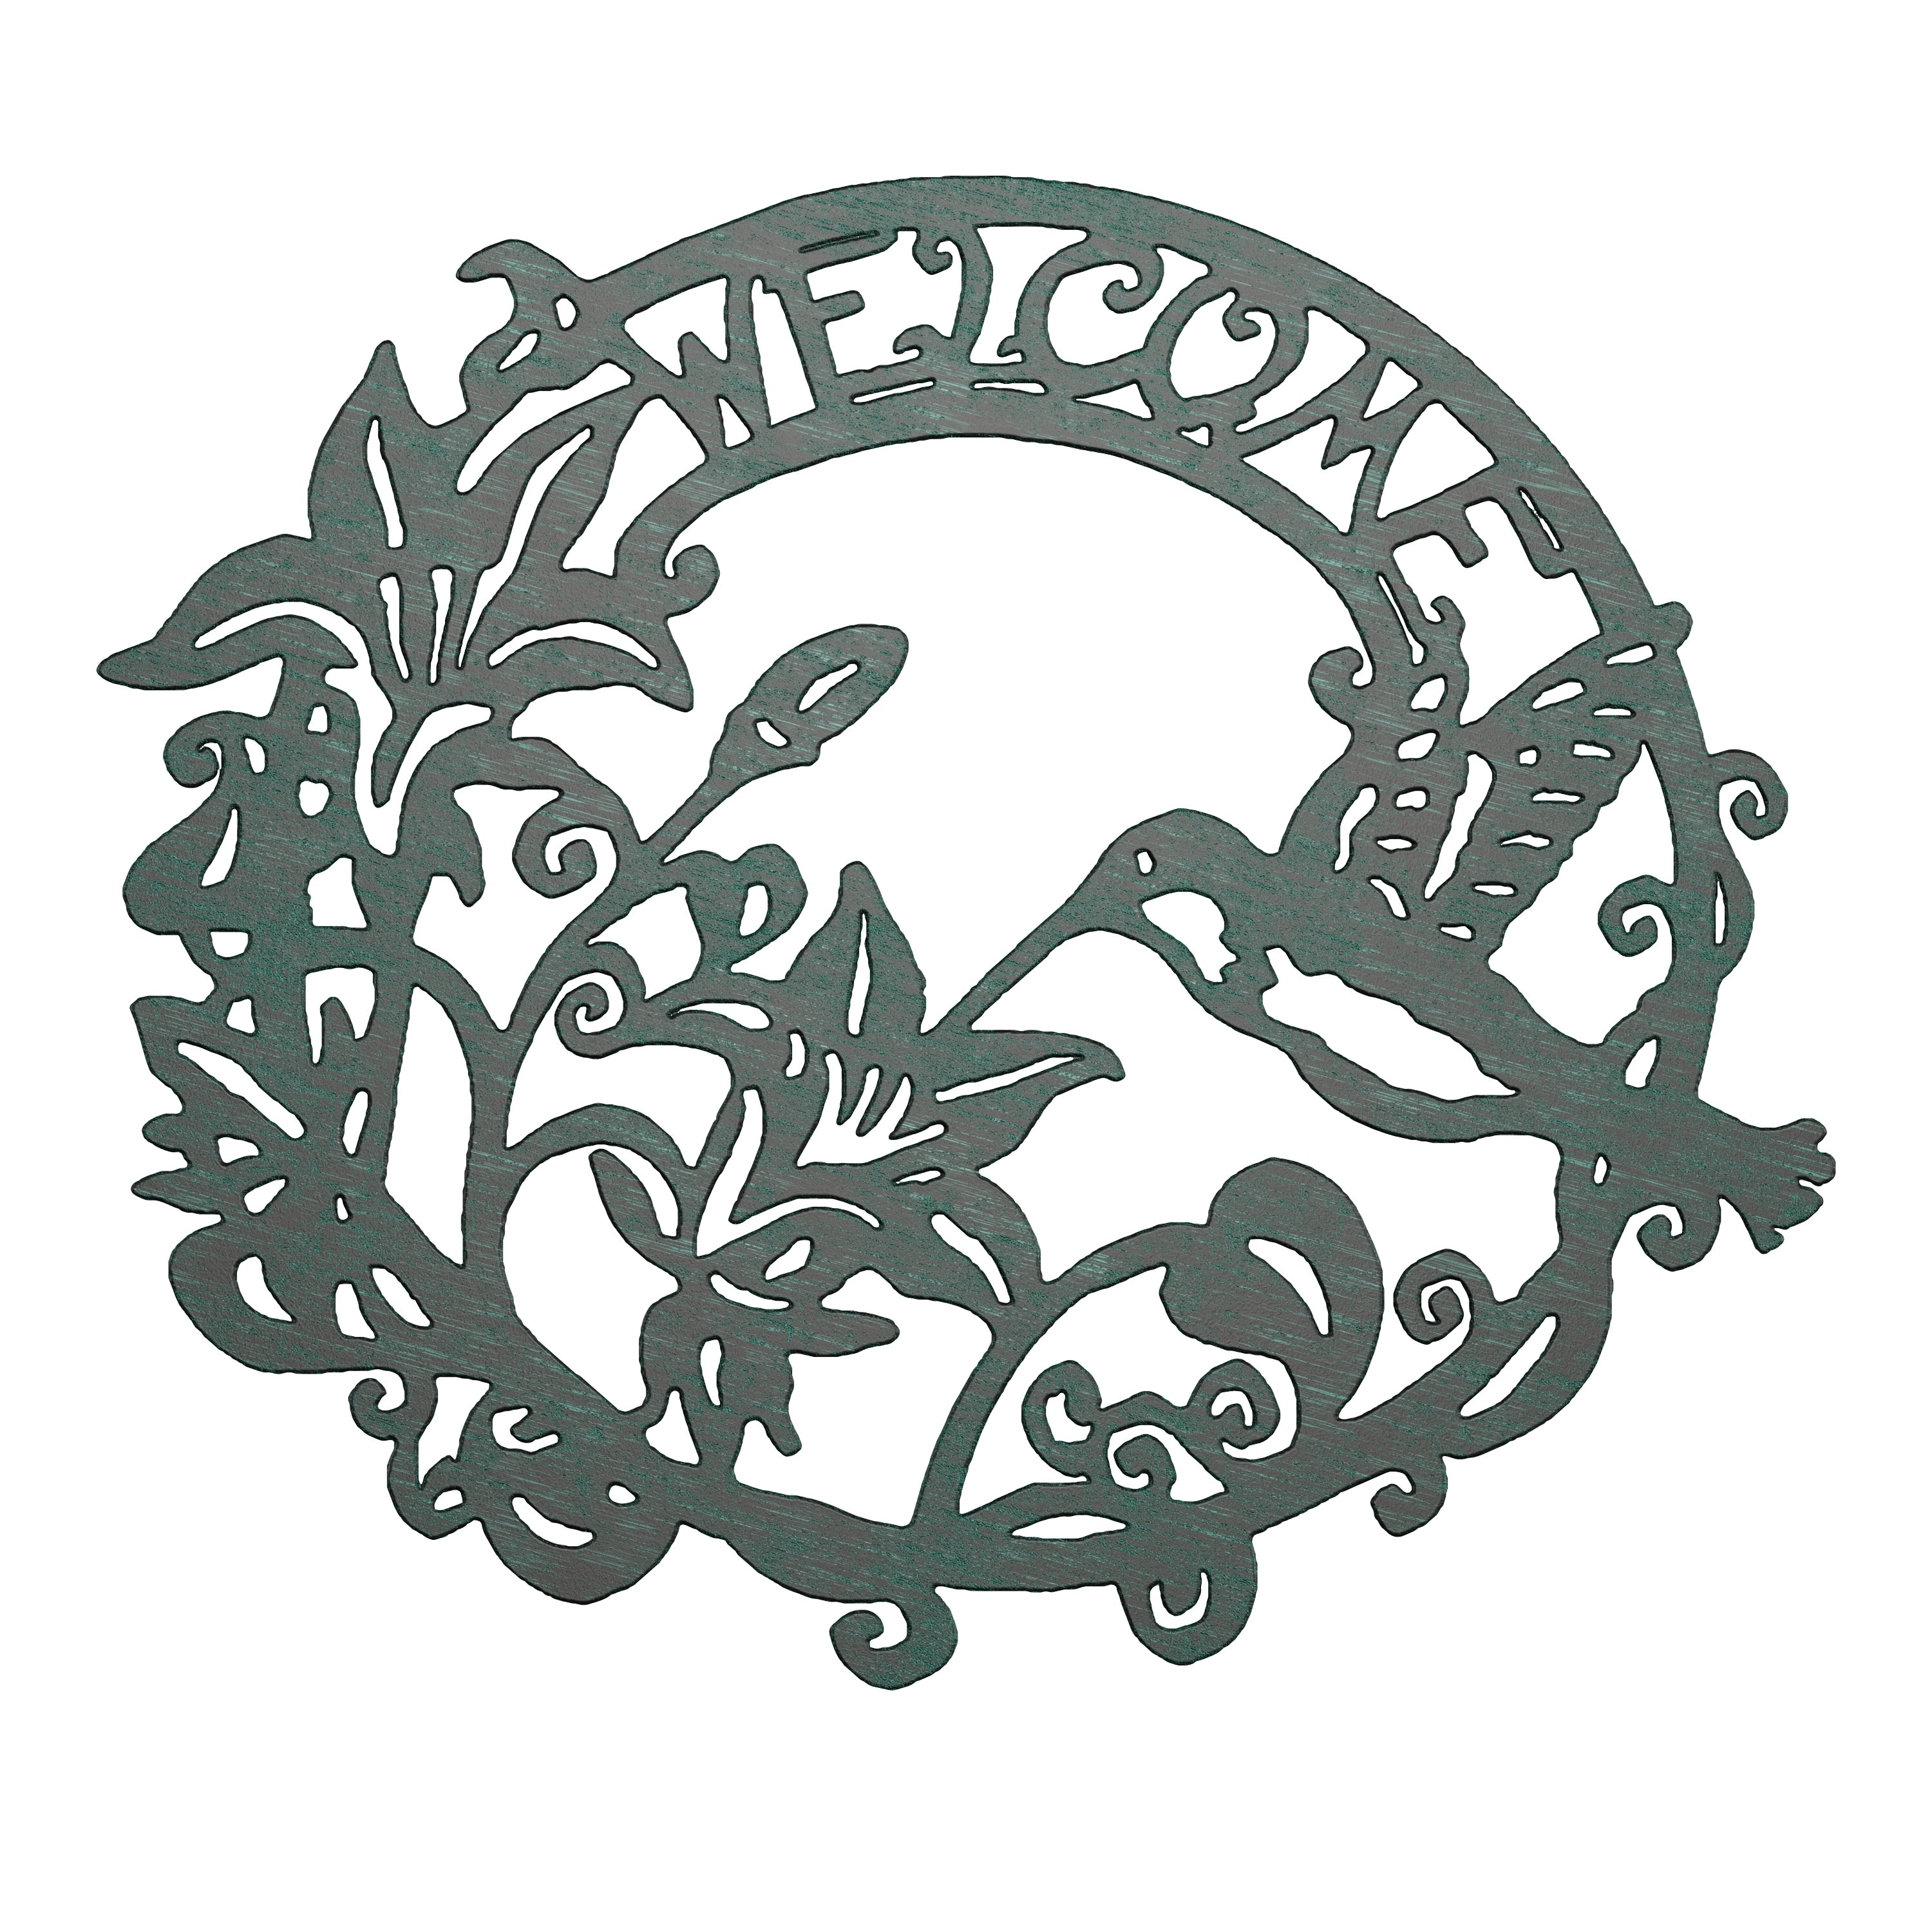 https://ak1.ostkcdn.com/images/products/25323488/Metal-Cutout-Welcome-Decorative-Wall-Sign-Wreath-Word-Art-by-Lavish-Home-d6a09f96-85c8-470a-8d43-ae07b2aa7c27.jpg